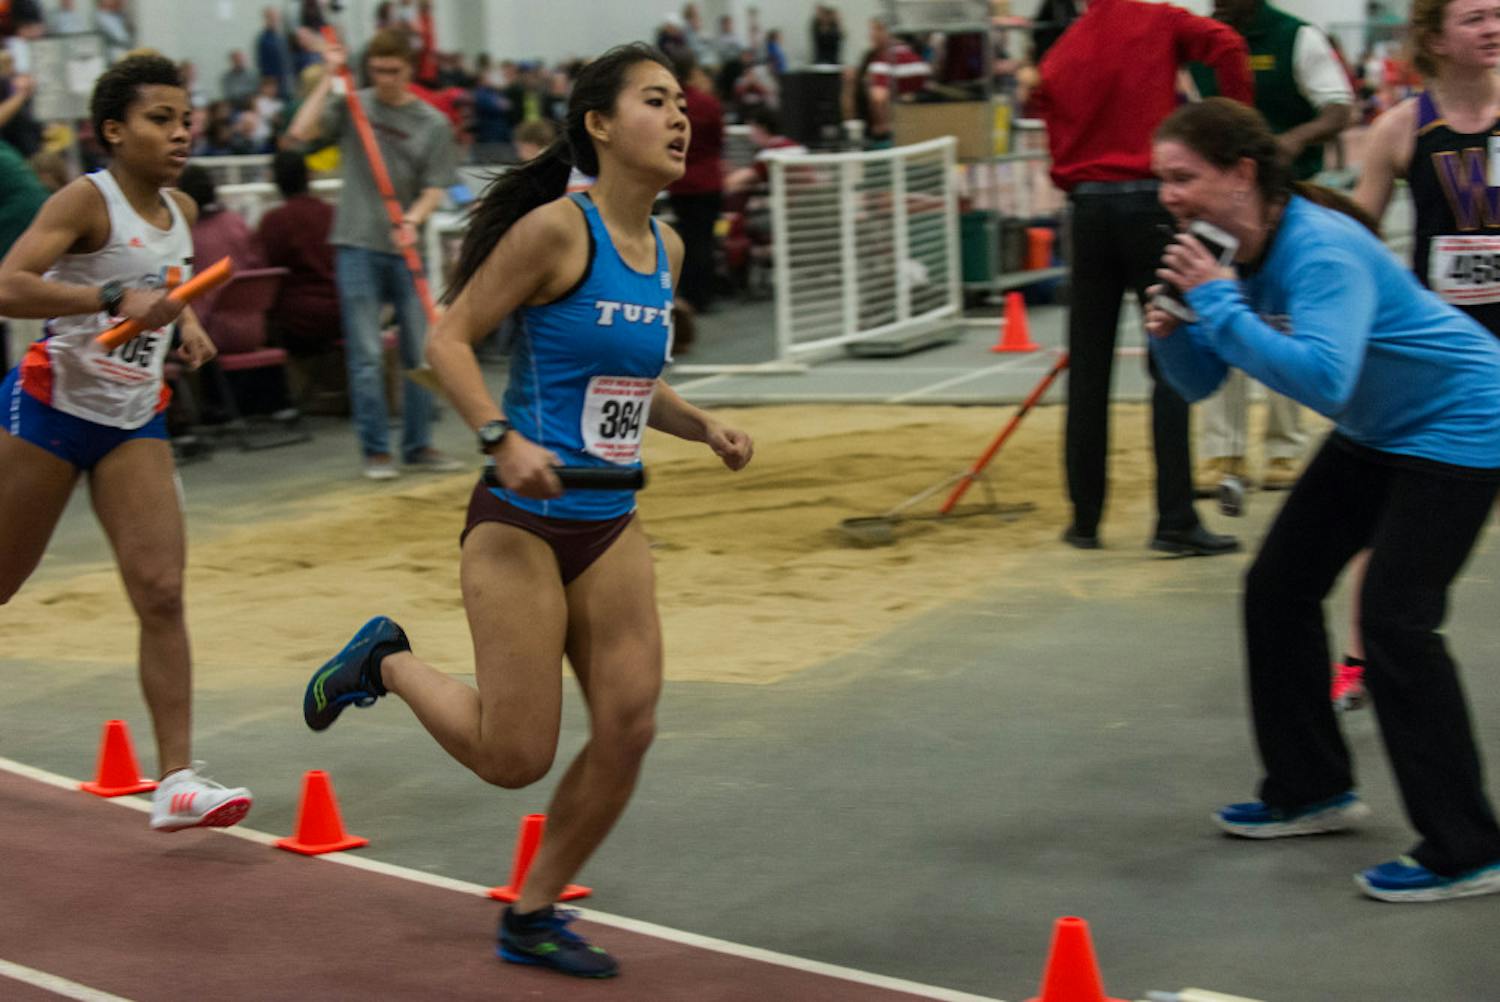 2017-02-18-Womens-Track-and-Field-at-MIT-031